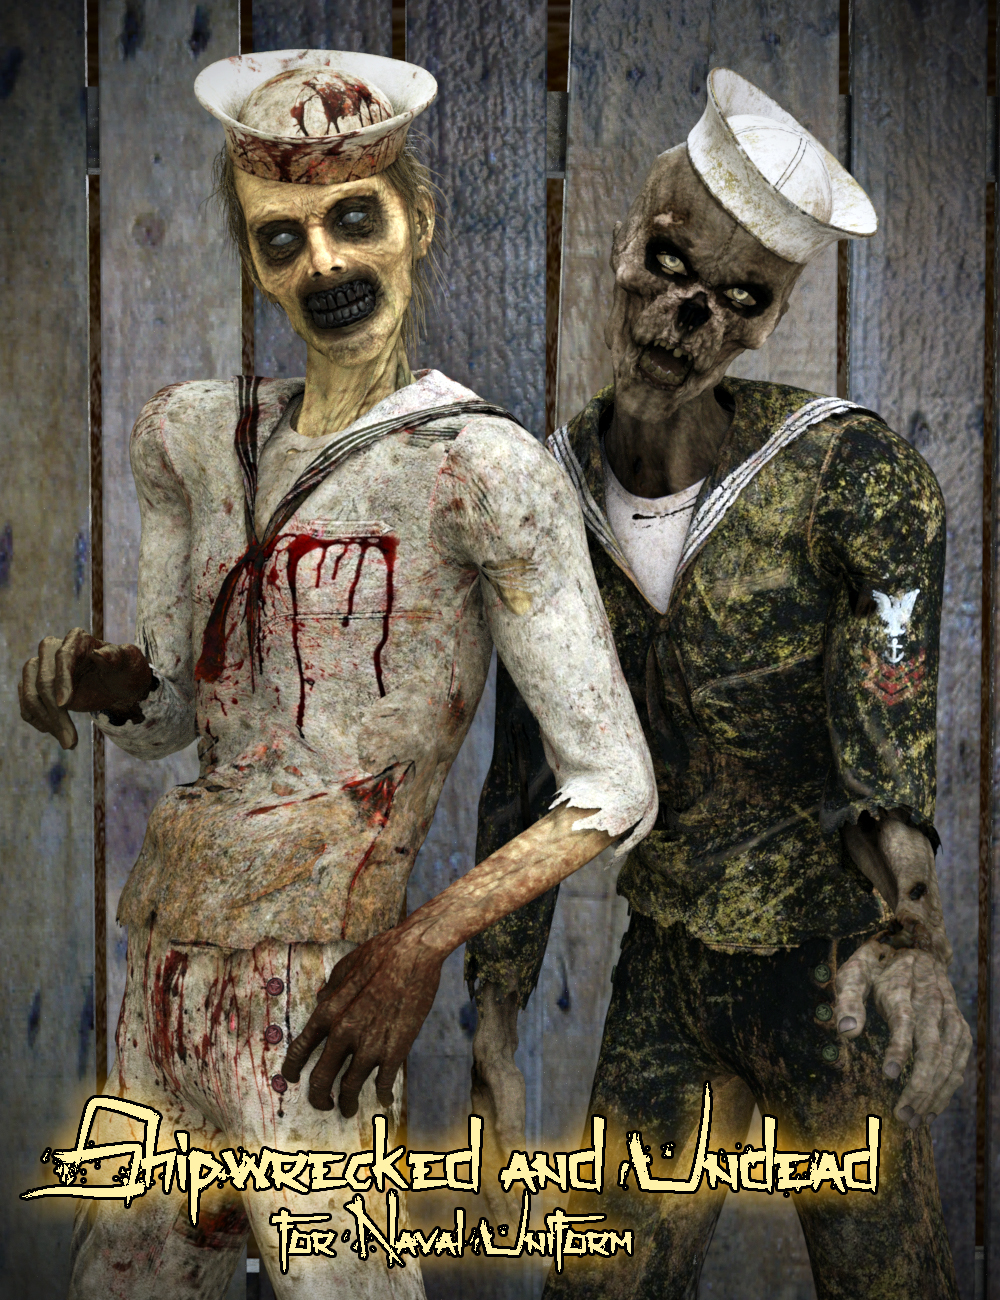 Shipwrecked and Undead for Naval Uniform by: SloshWerks, 3D Models by Daz 3D